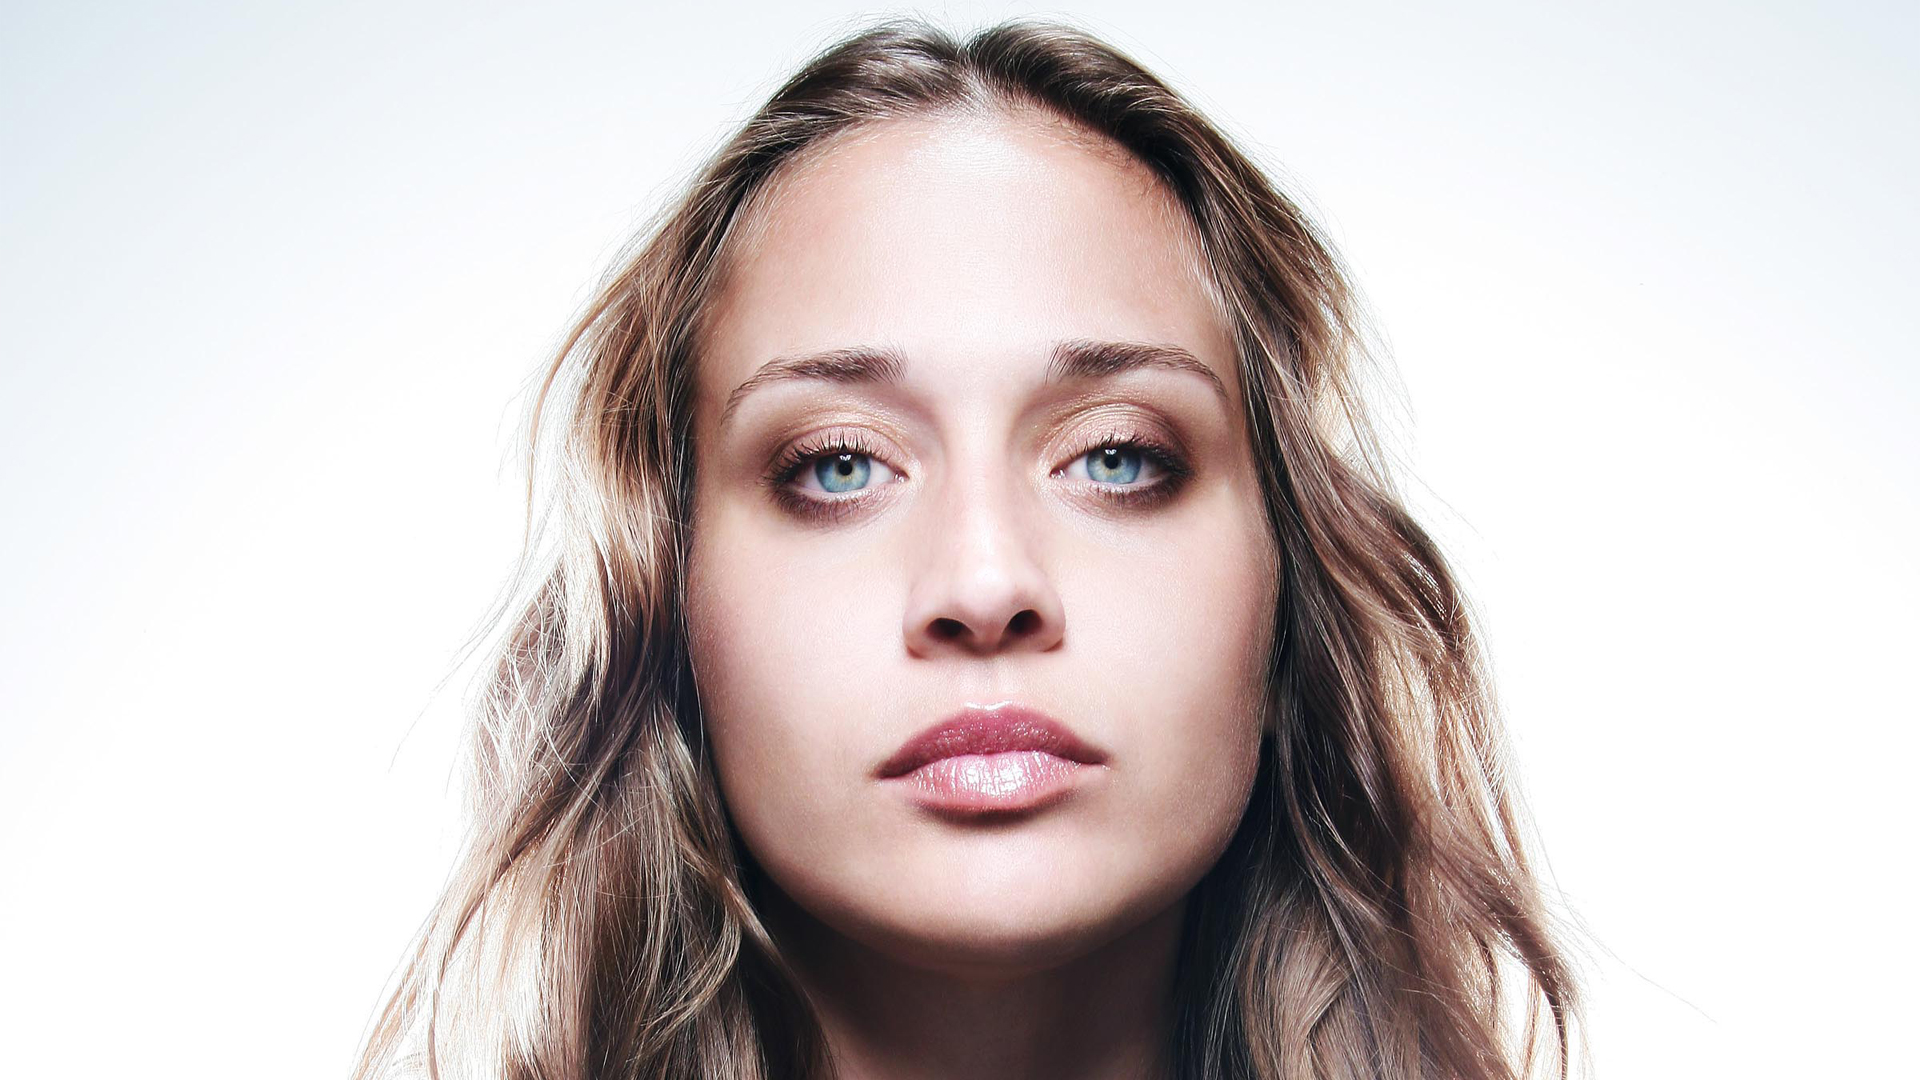 Music Fiona Apple HD Wallpaper | Background Image